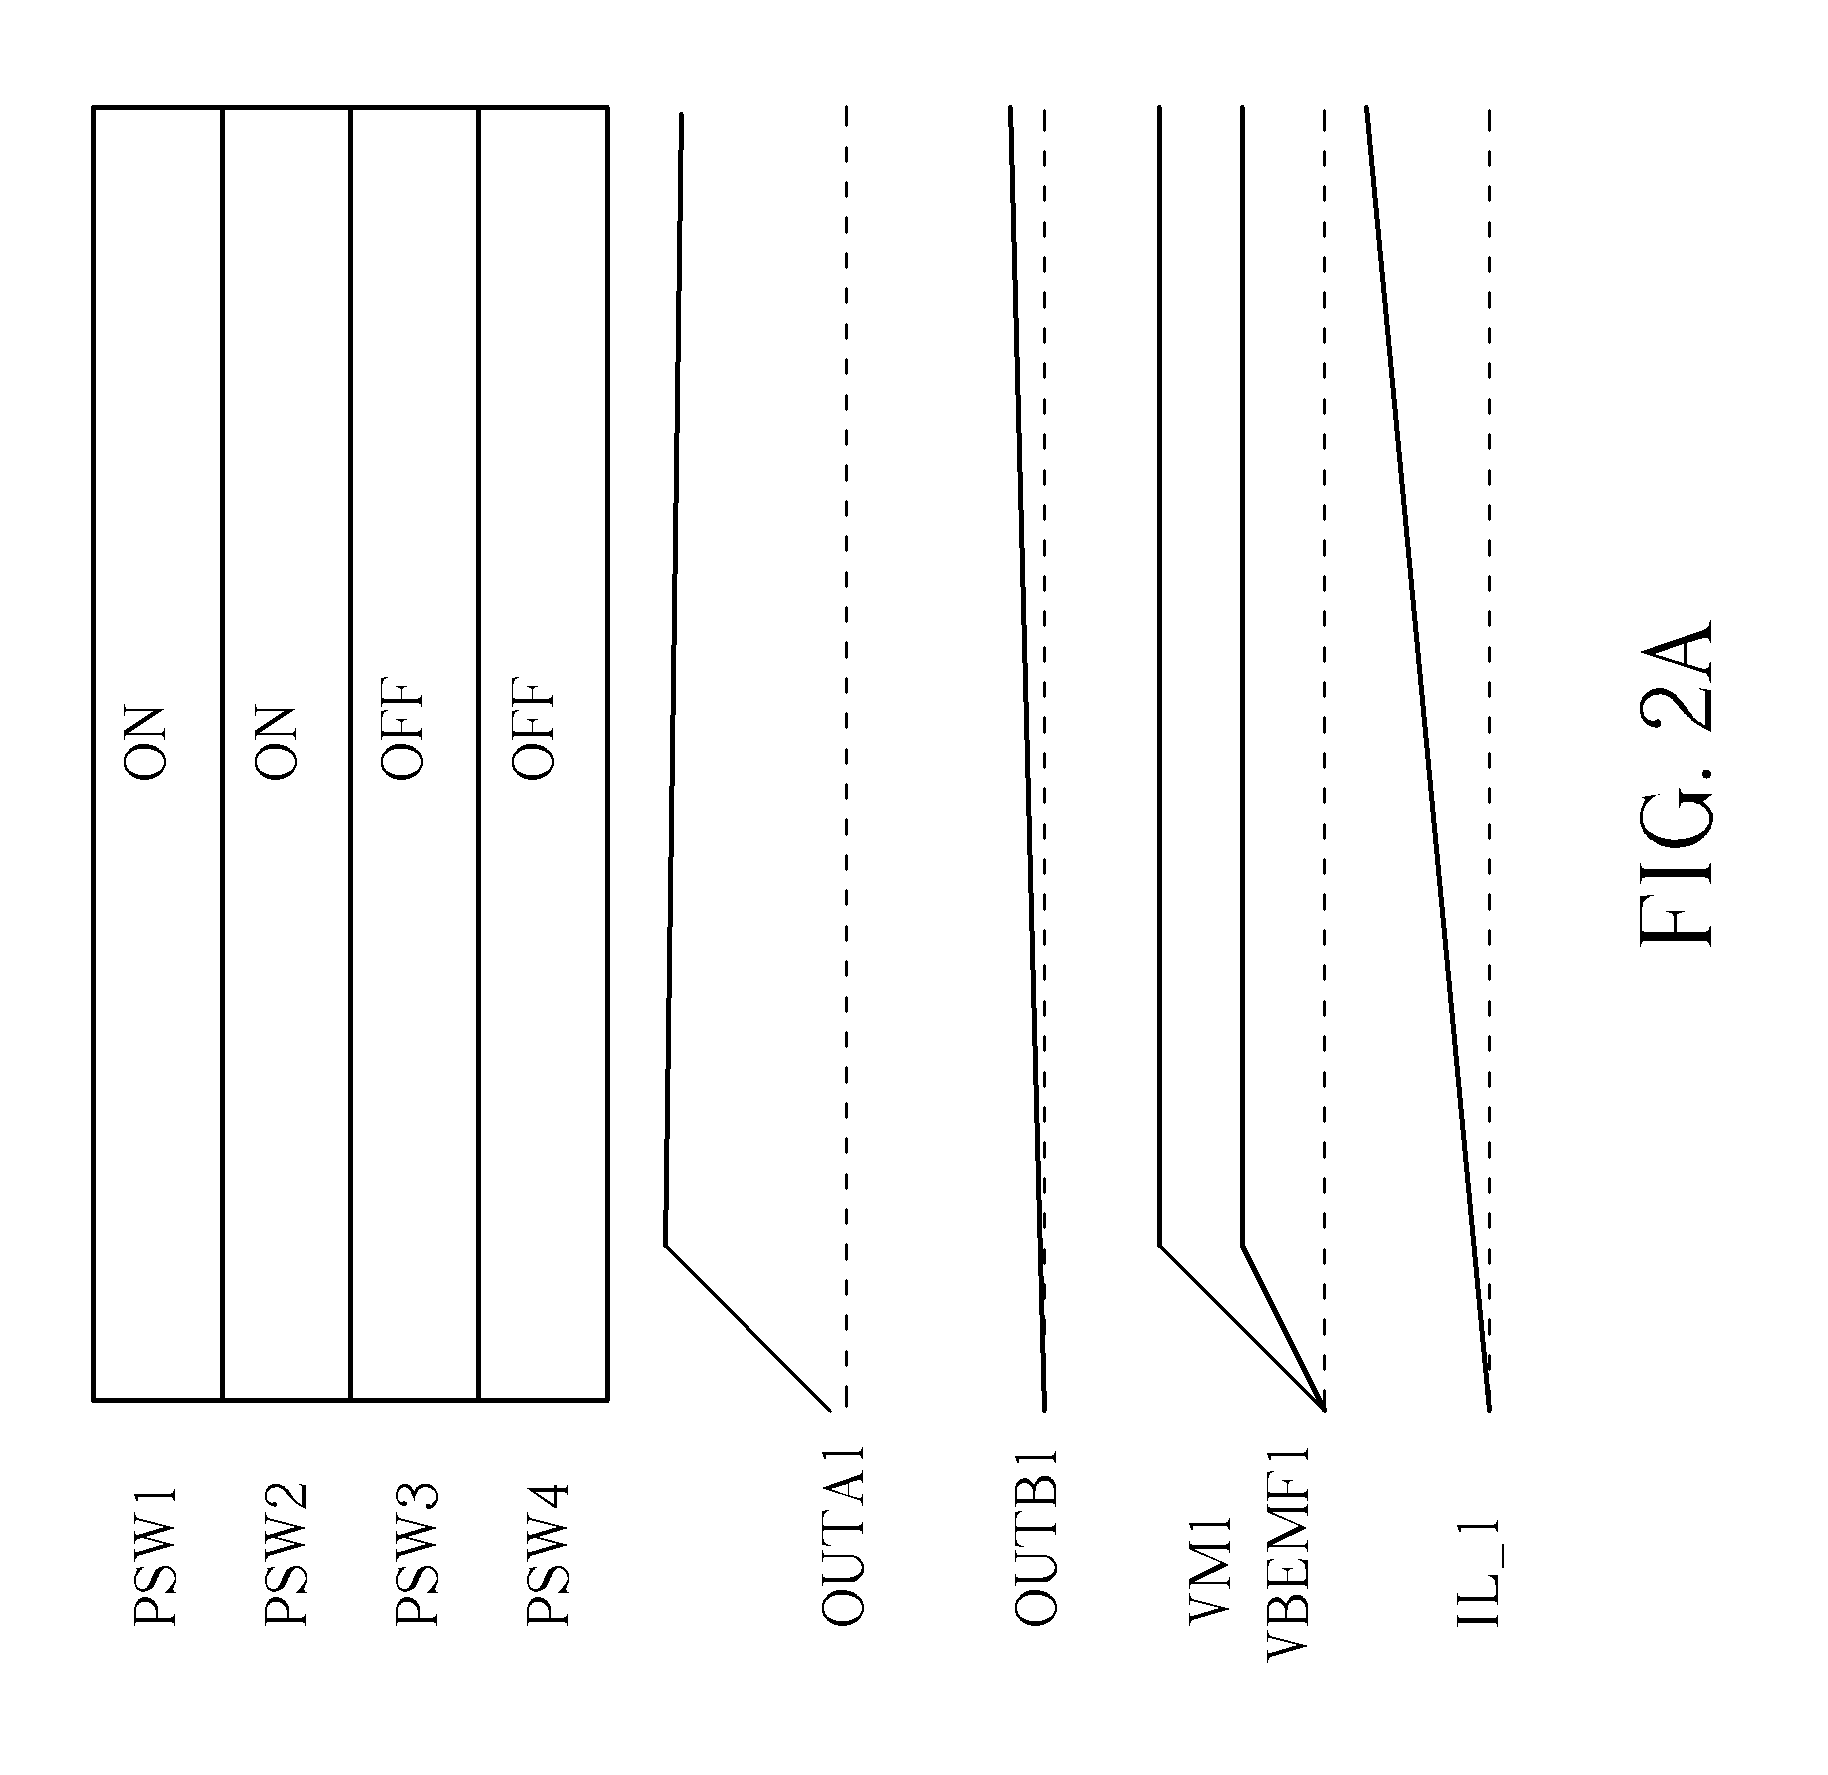 Method of driving DC motor and related circuit for avoiding reverse current